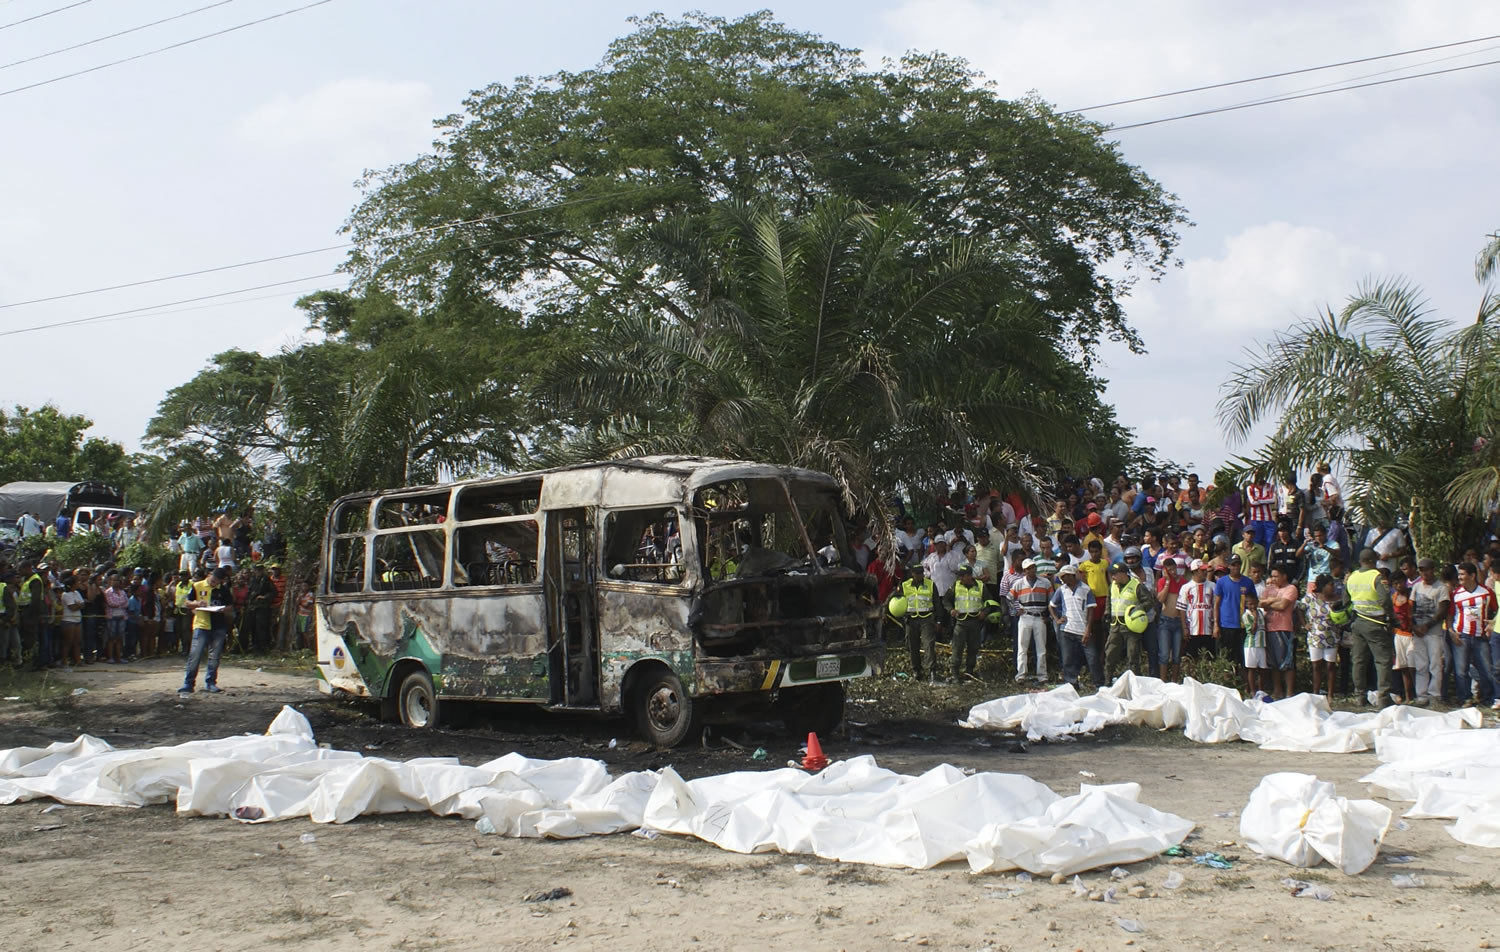 People gather around a burnt bus and bags containing the remains of children who where killed when their bus caught fire in Fundacion, in northern Colombia, Sunday, May 18, 2014. Colombian authorities have detained the driver of the overcrowded bus that burned, killing 32 children, the local mayor said Monday.